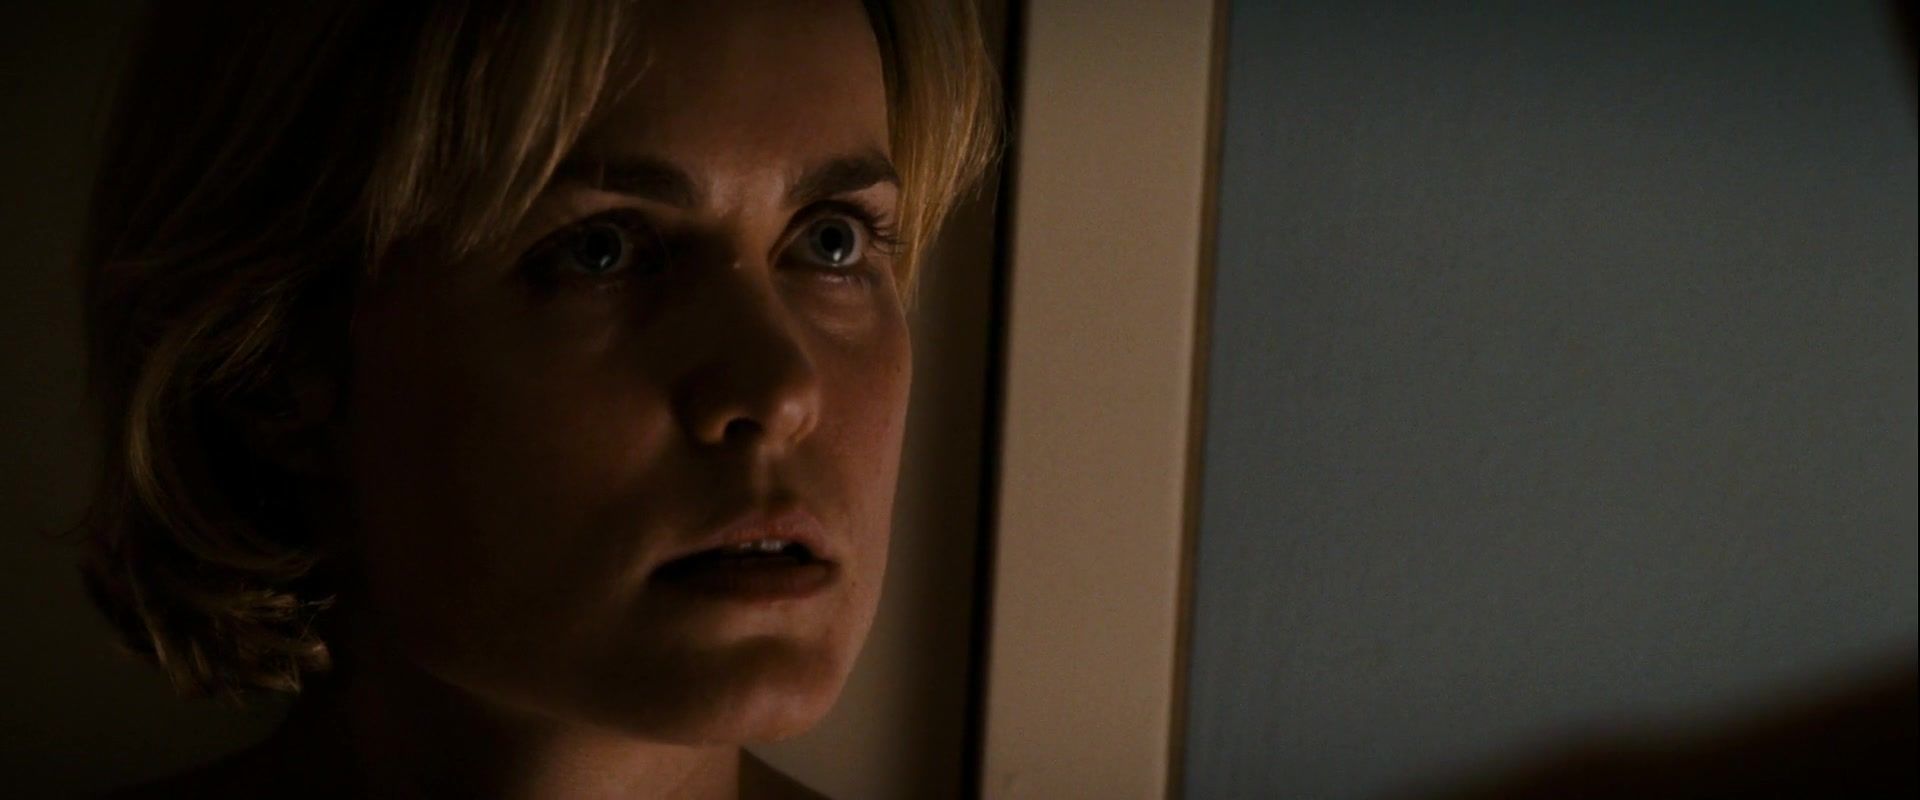 Small Topless Radha Mitchell - Feast of Love (2007) Moaning